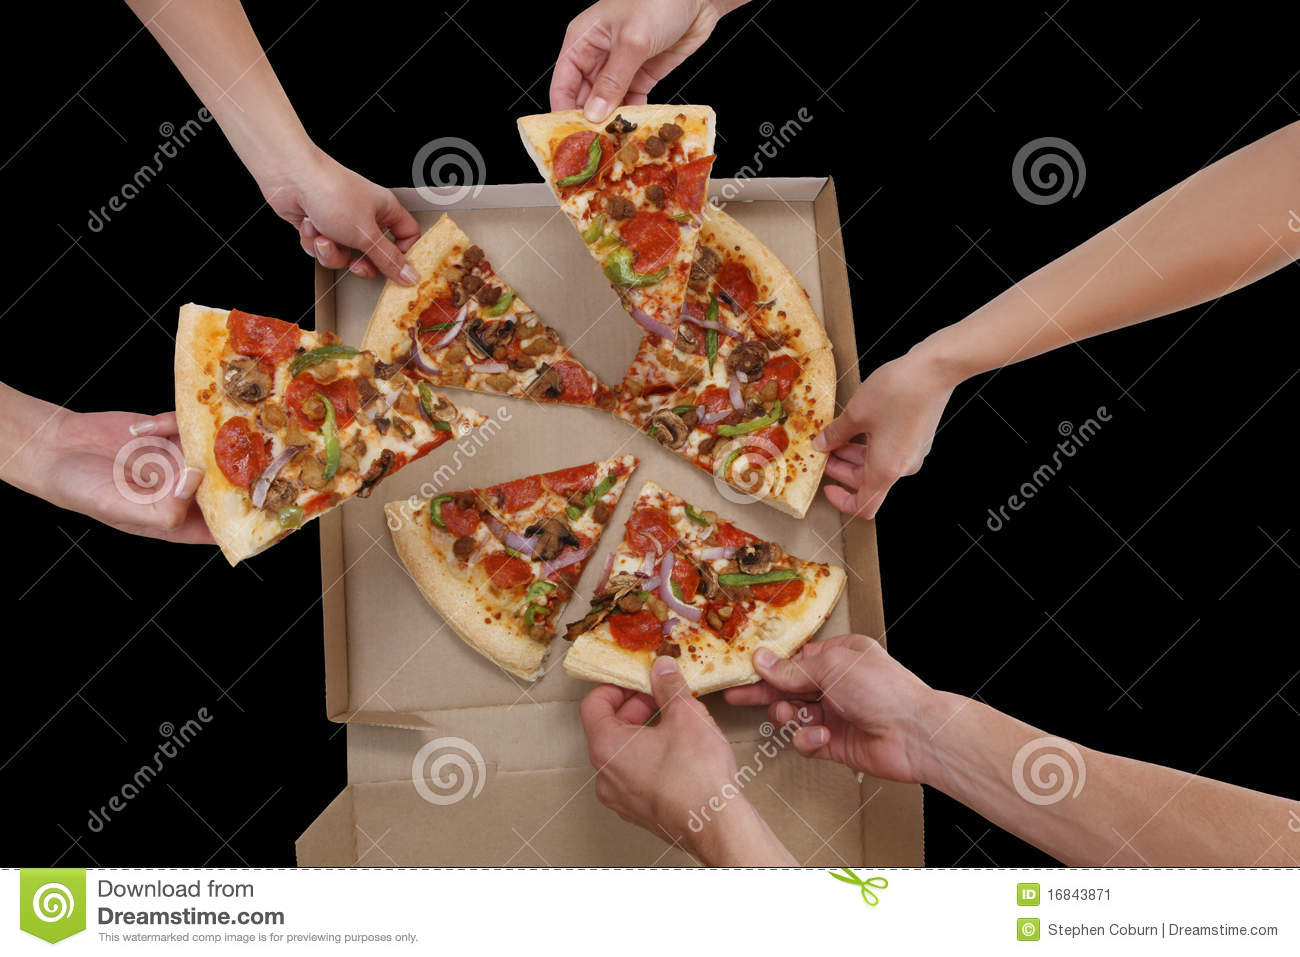 People Eating Pizza Stock Image   Image  16843871